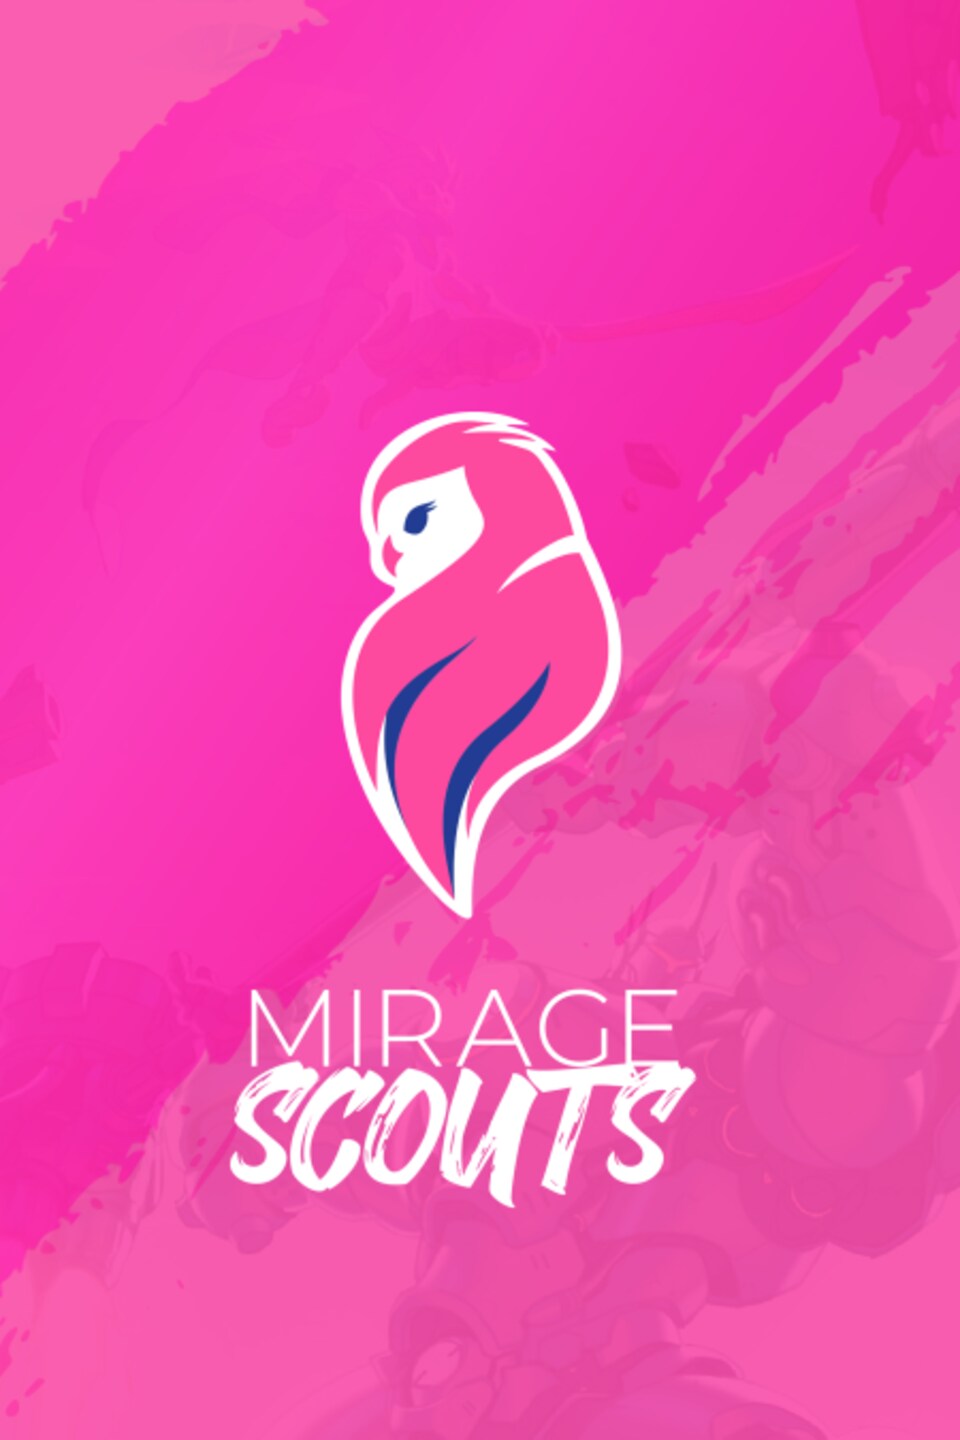 Logo showing a pink and purple bird on a pink background with the words 